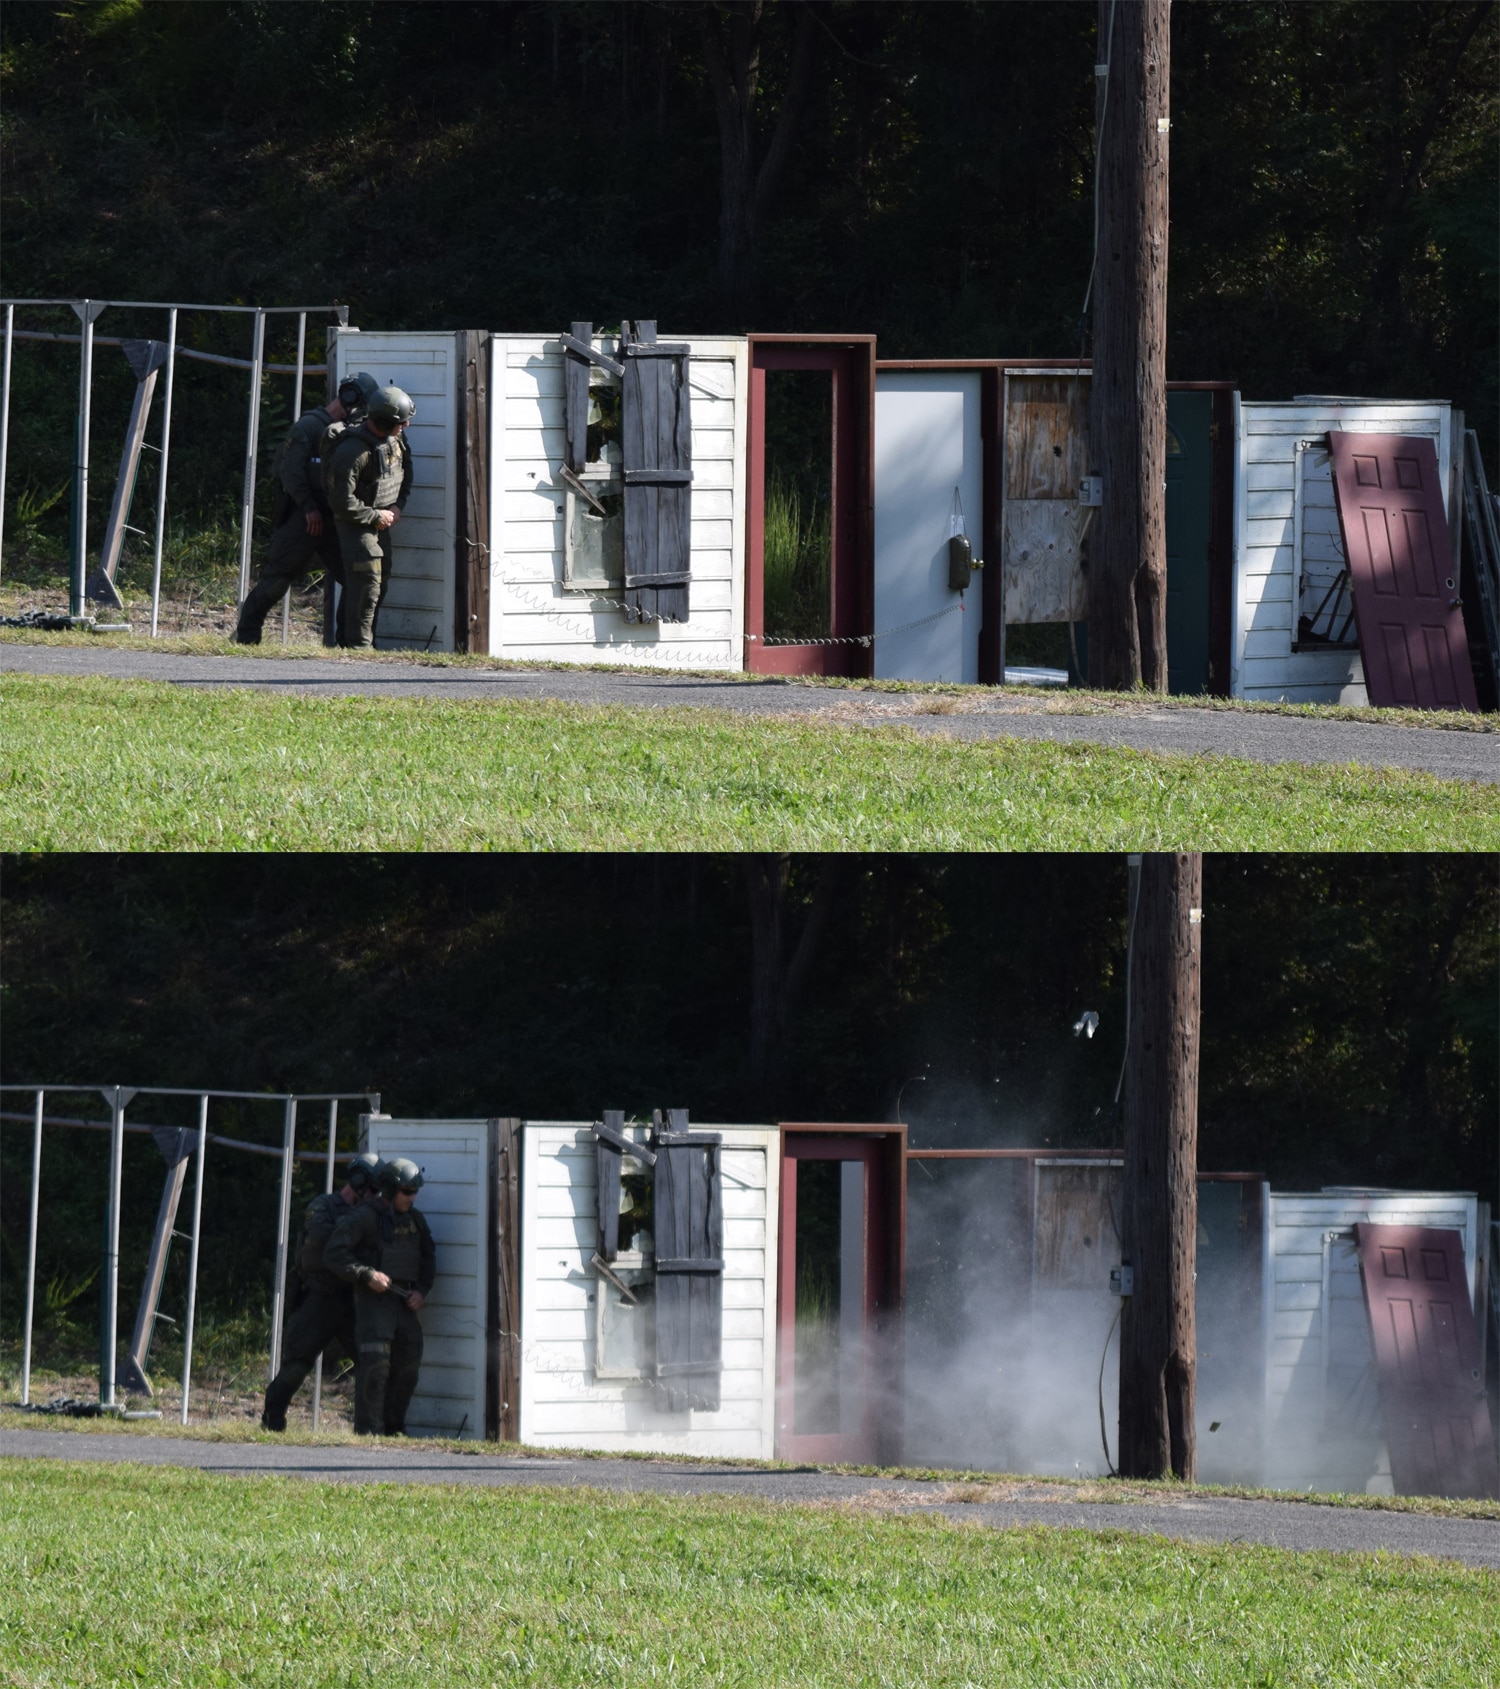 ATF SRT agents demonstrate how to breach a door with explosives. The explosive device is essentially detonation cord sandwiched between a water bottle and an IV bag. (Photo: Daniel Terrill/Guns.com)